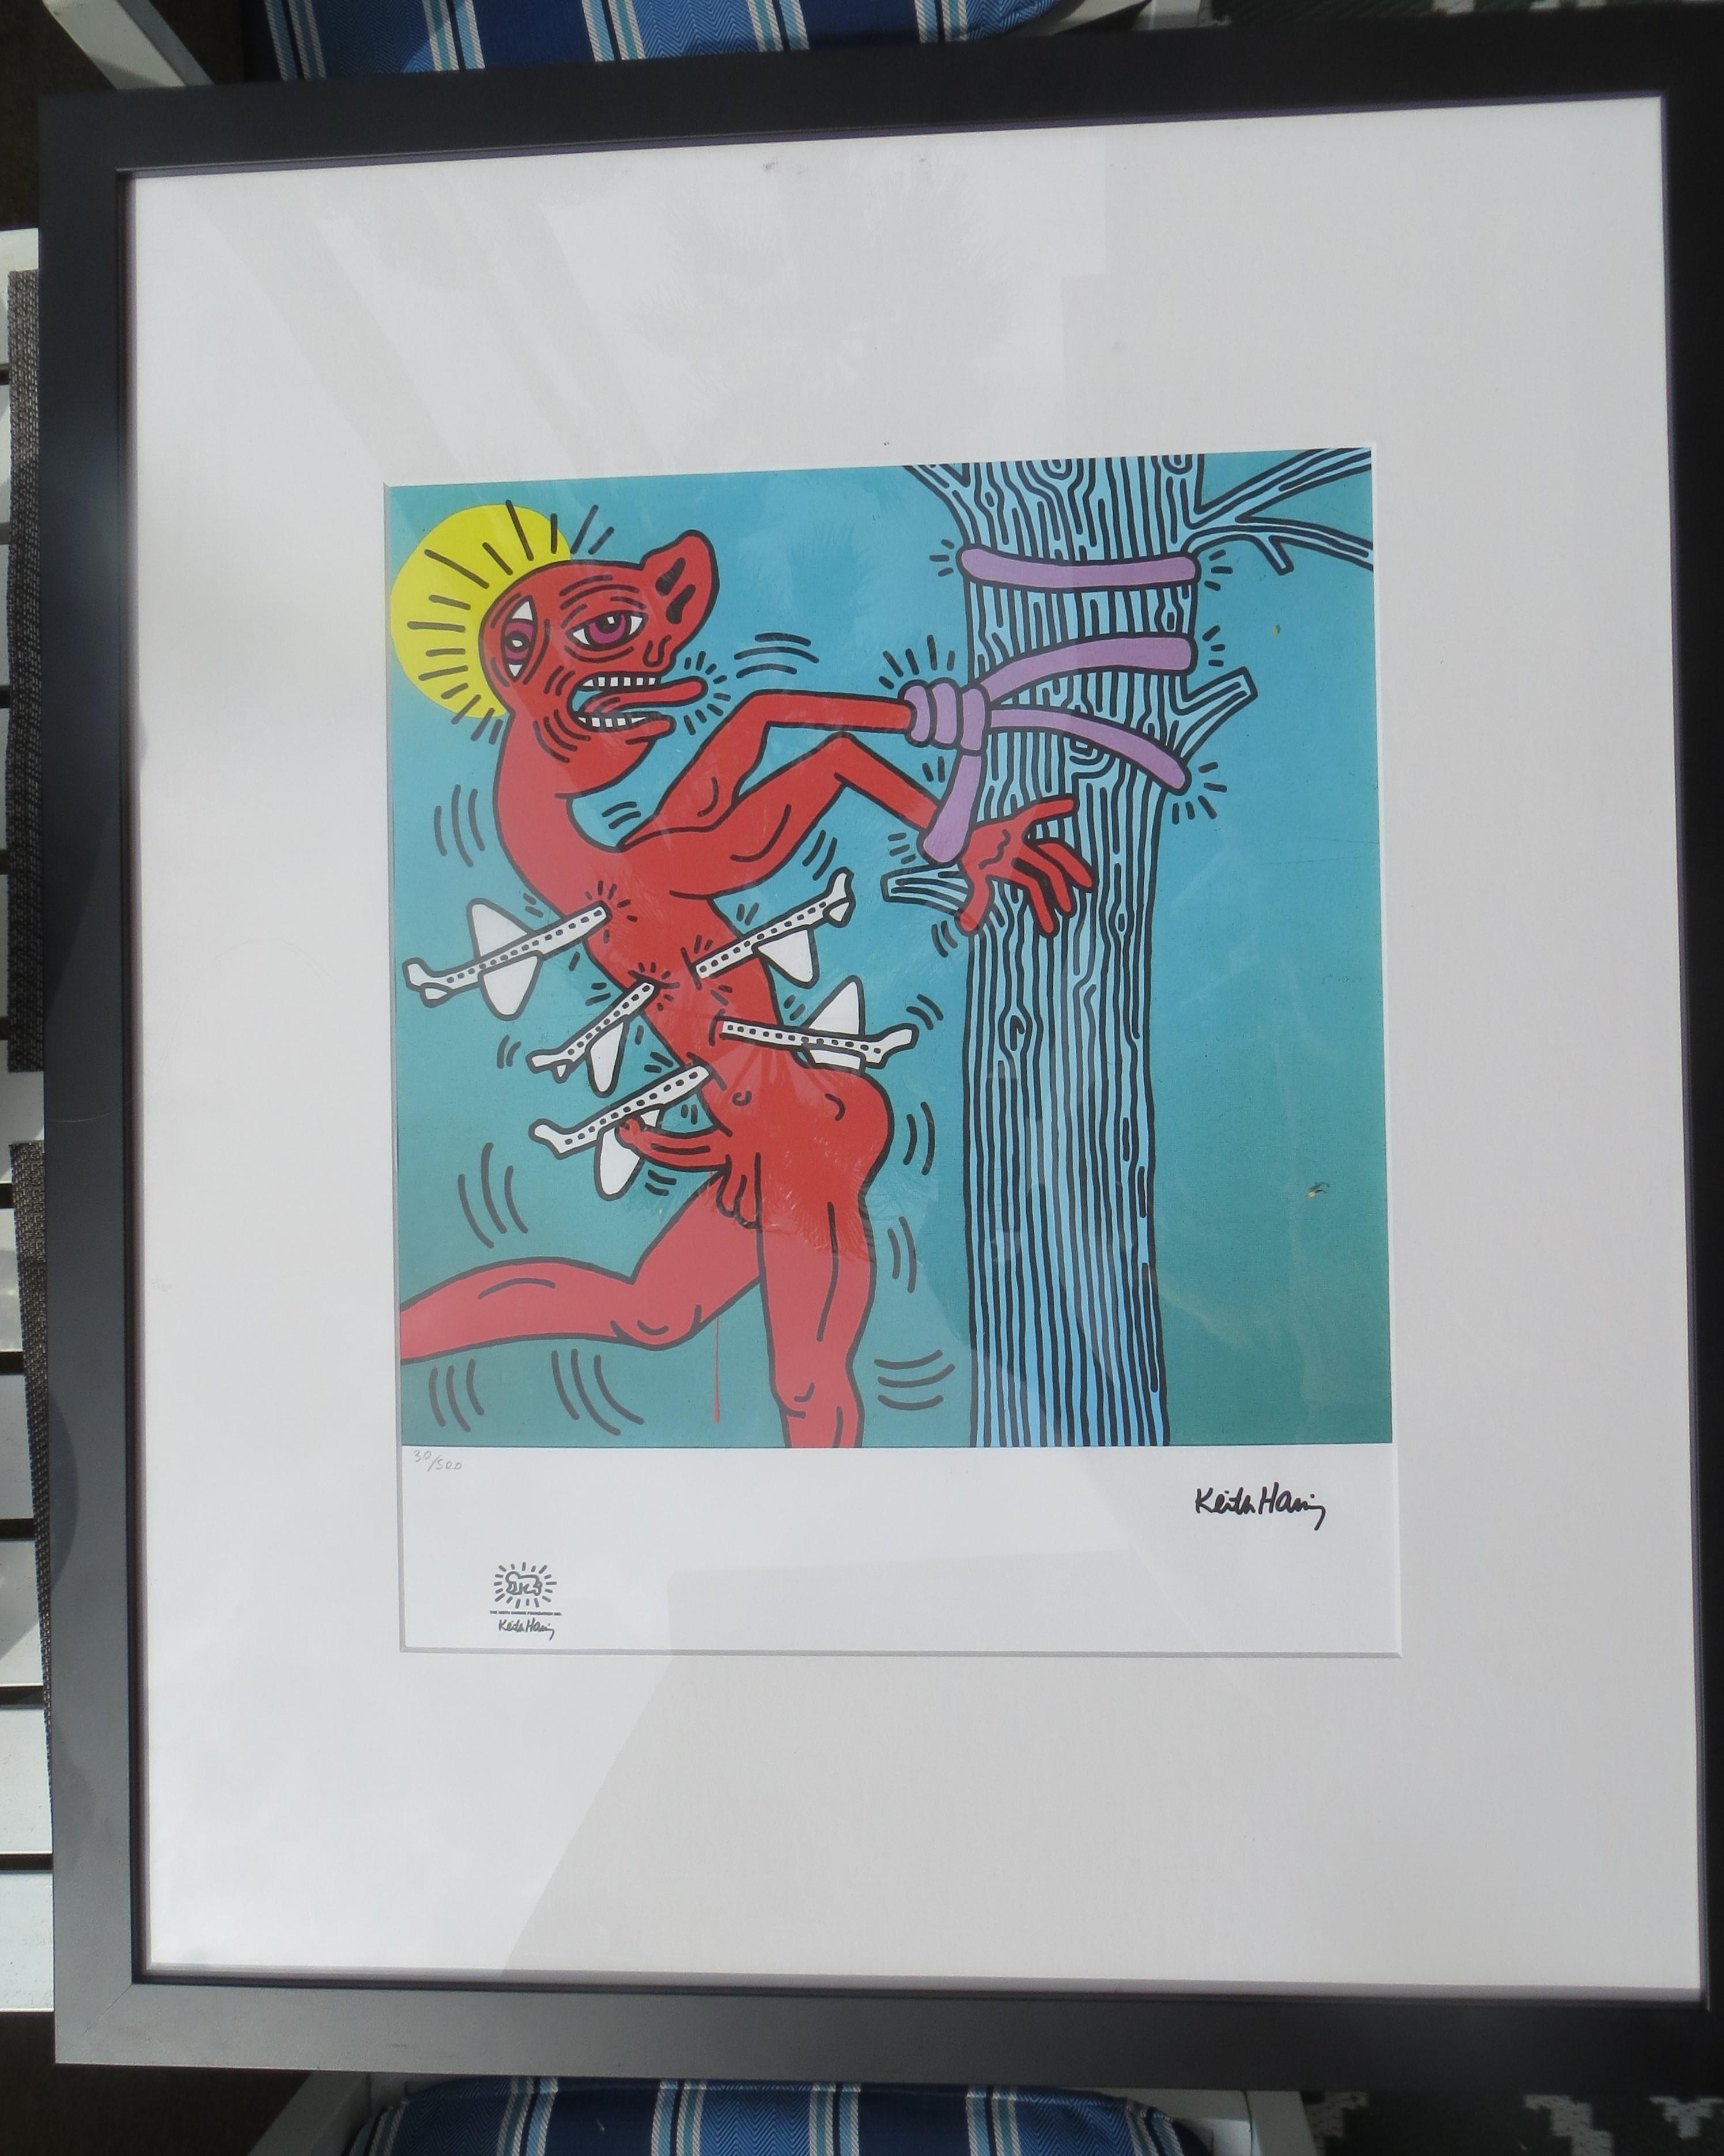  Keith Haring, Saint Sebastian, Lithograph Numbered 30 /500 - Pop Art Print by (after) Keith Haring